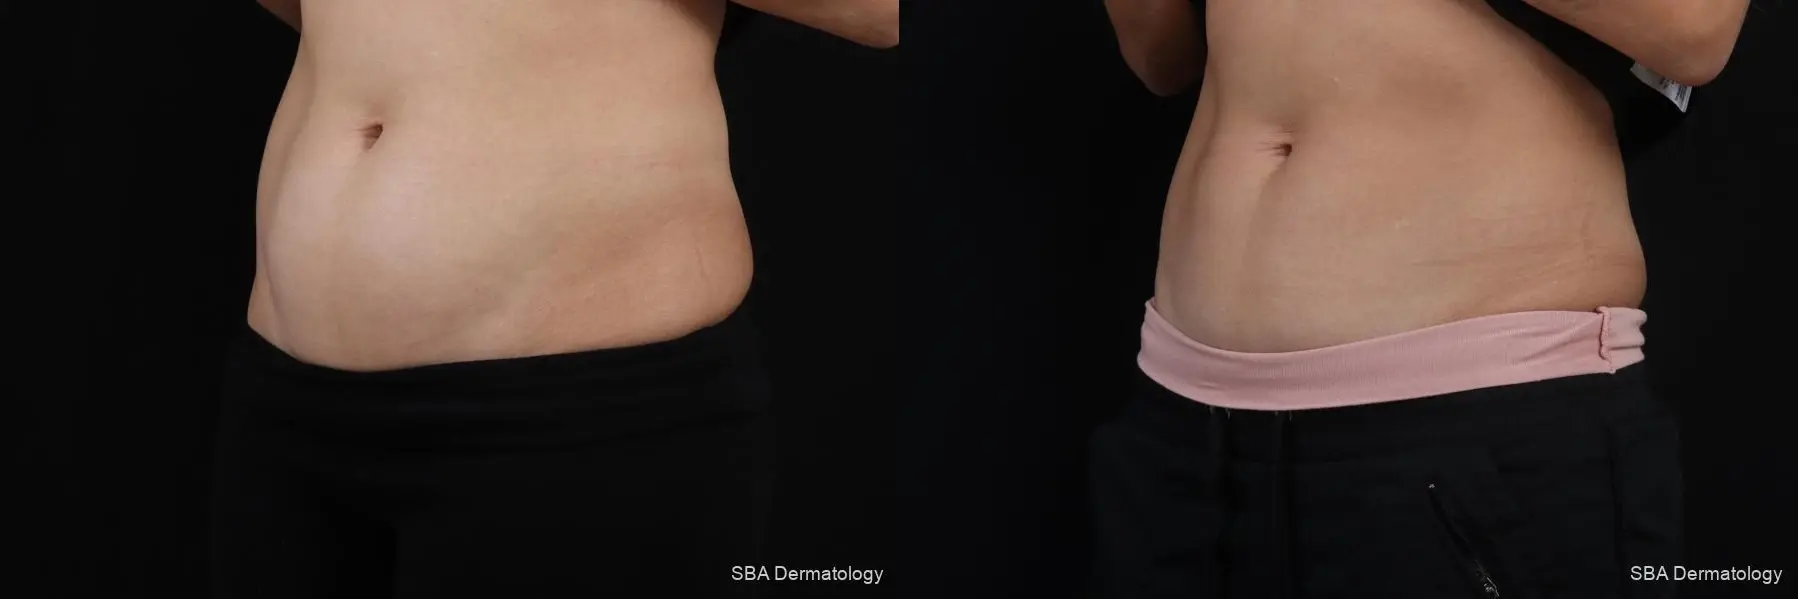 Coolsculpting: Patient 8 - Before and After 2